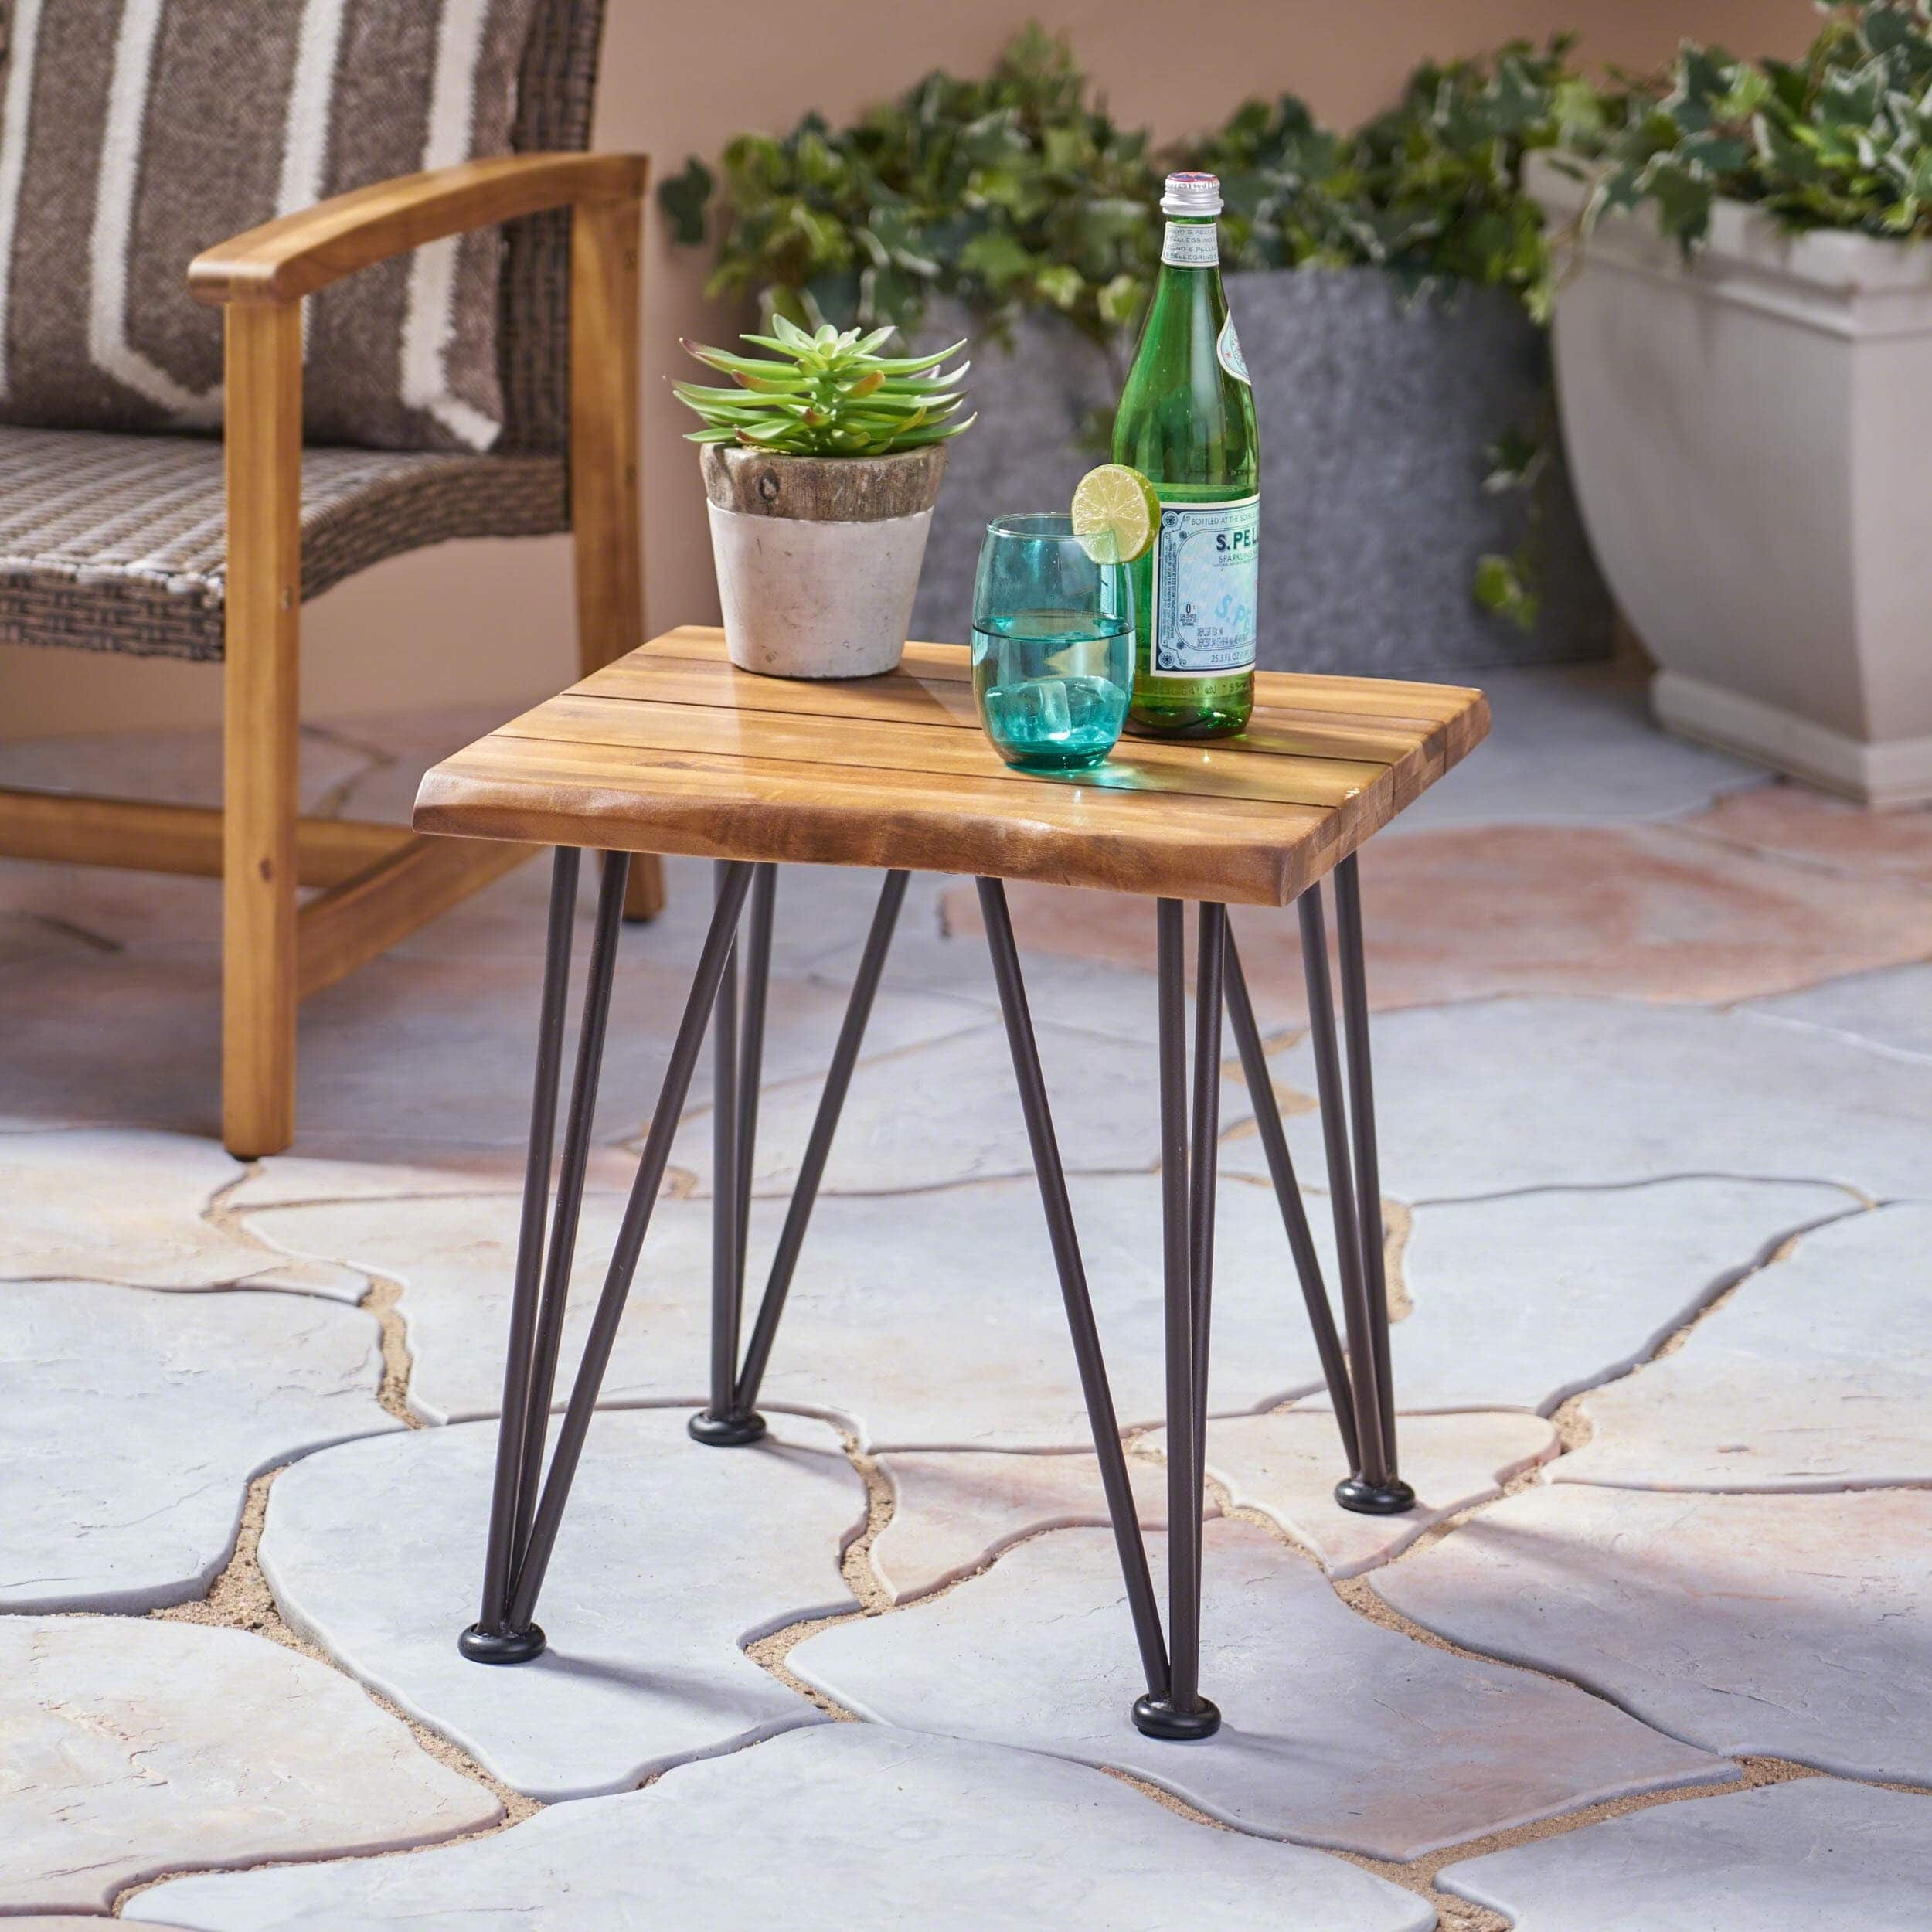 Buy Outdoor Coffee & Side Tables Online at Overstock | Our Best Patio